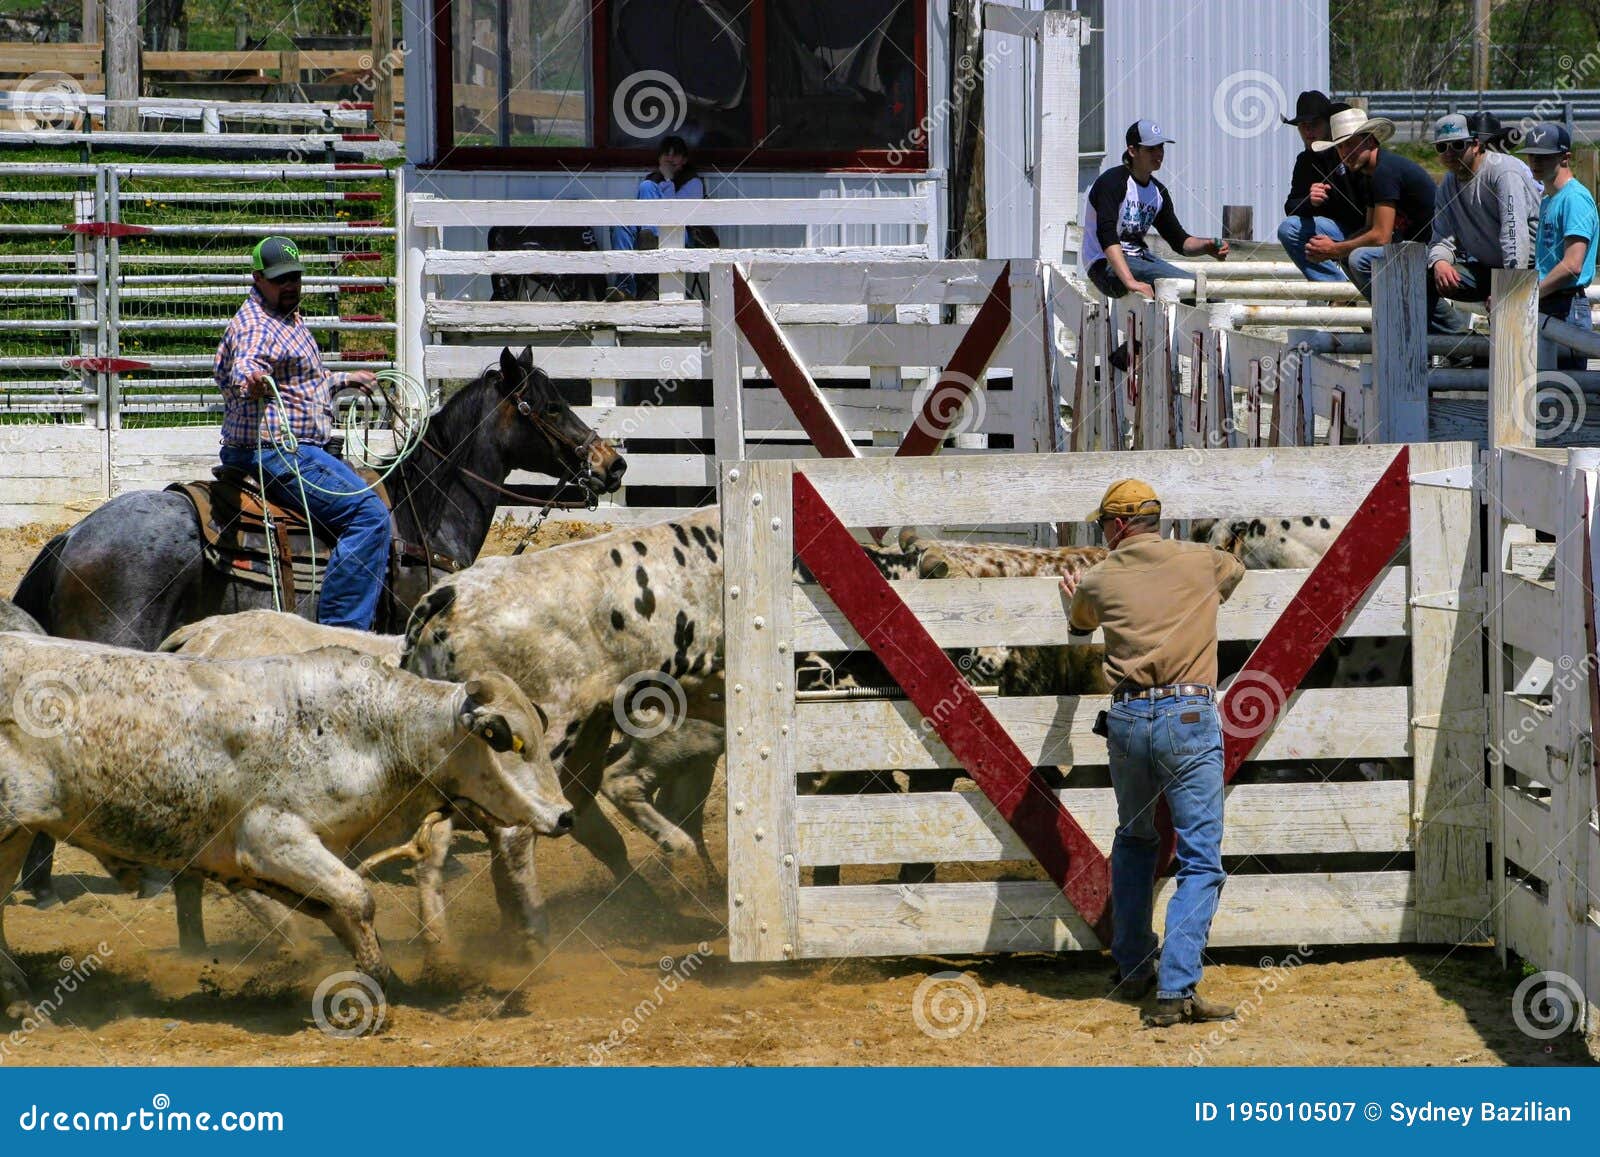 Cowtown Rodeo Wrangling the Bulls into Fence - 2018 Editorial Photography -  Image of wood, planks: 195010507